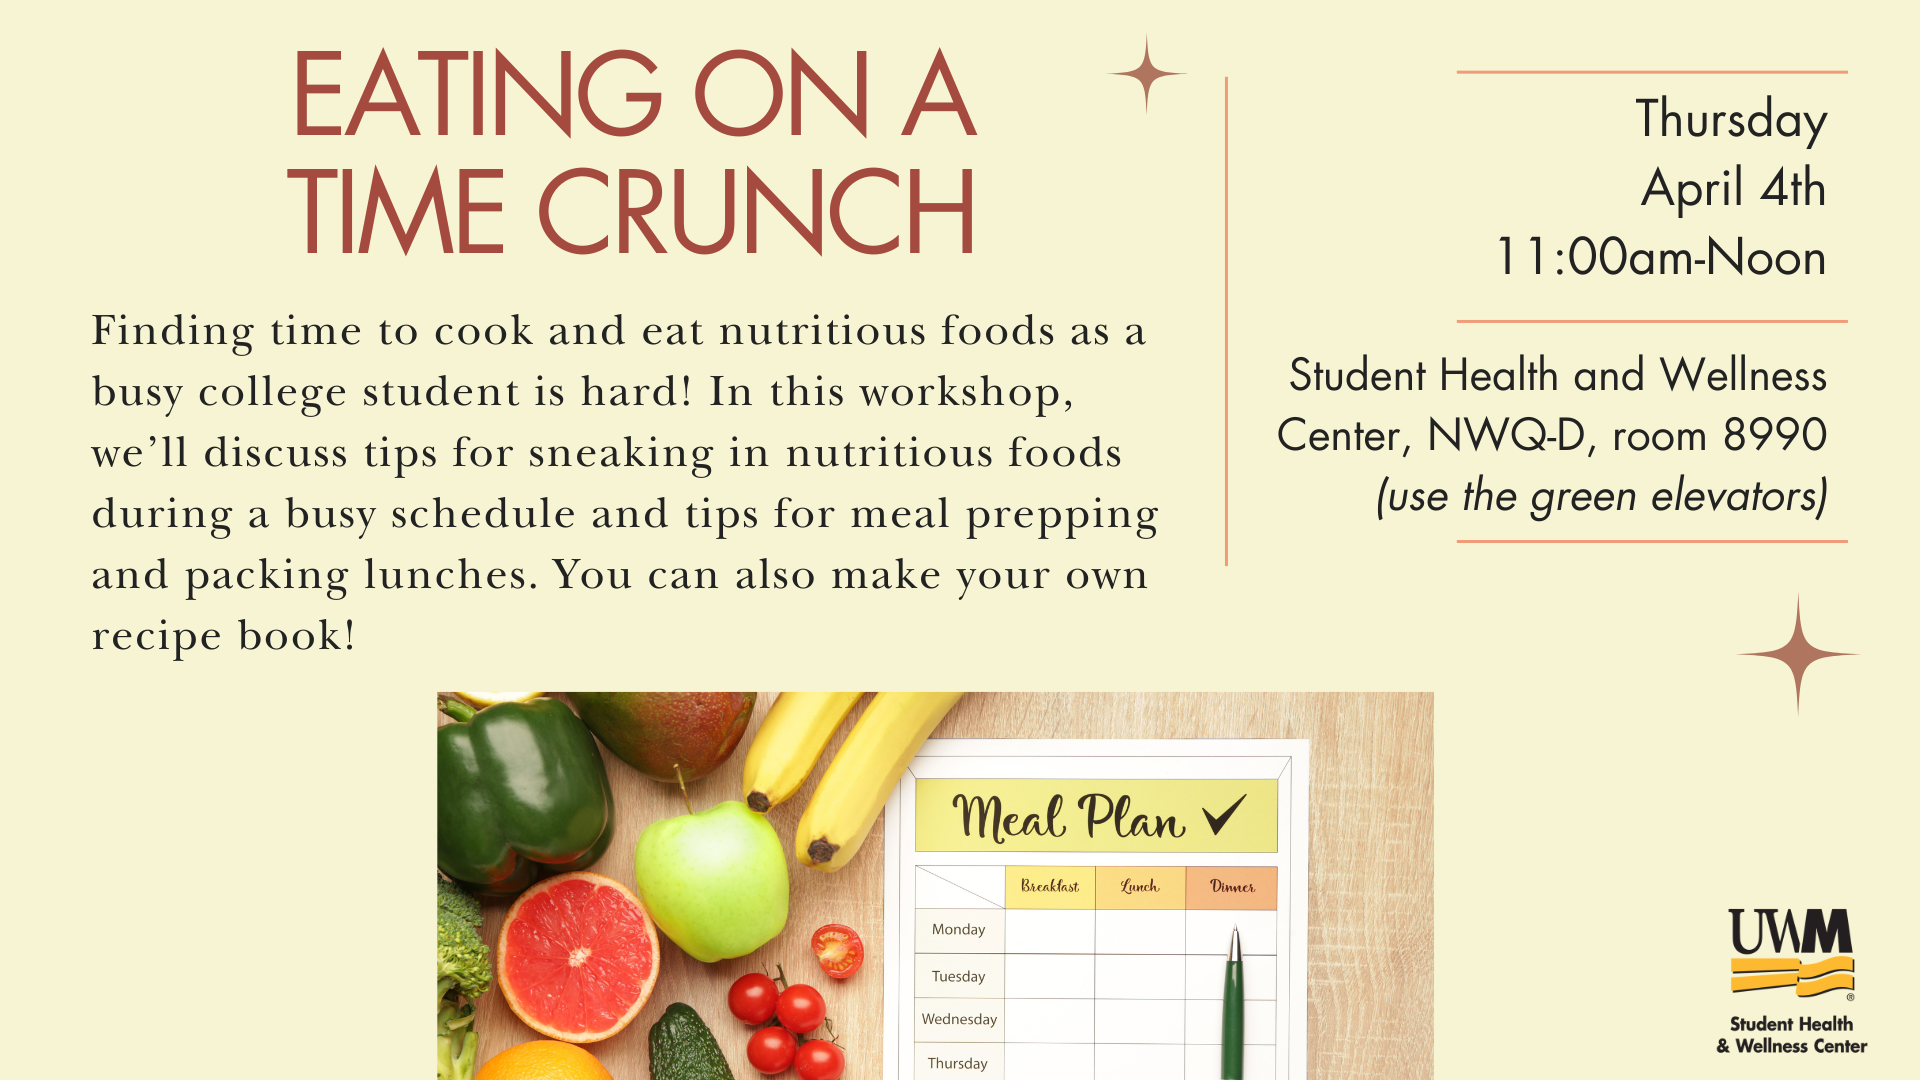 A graphic sharing information about an event focused on eating on a time crunch